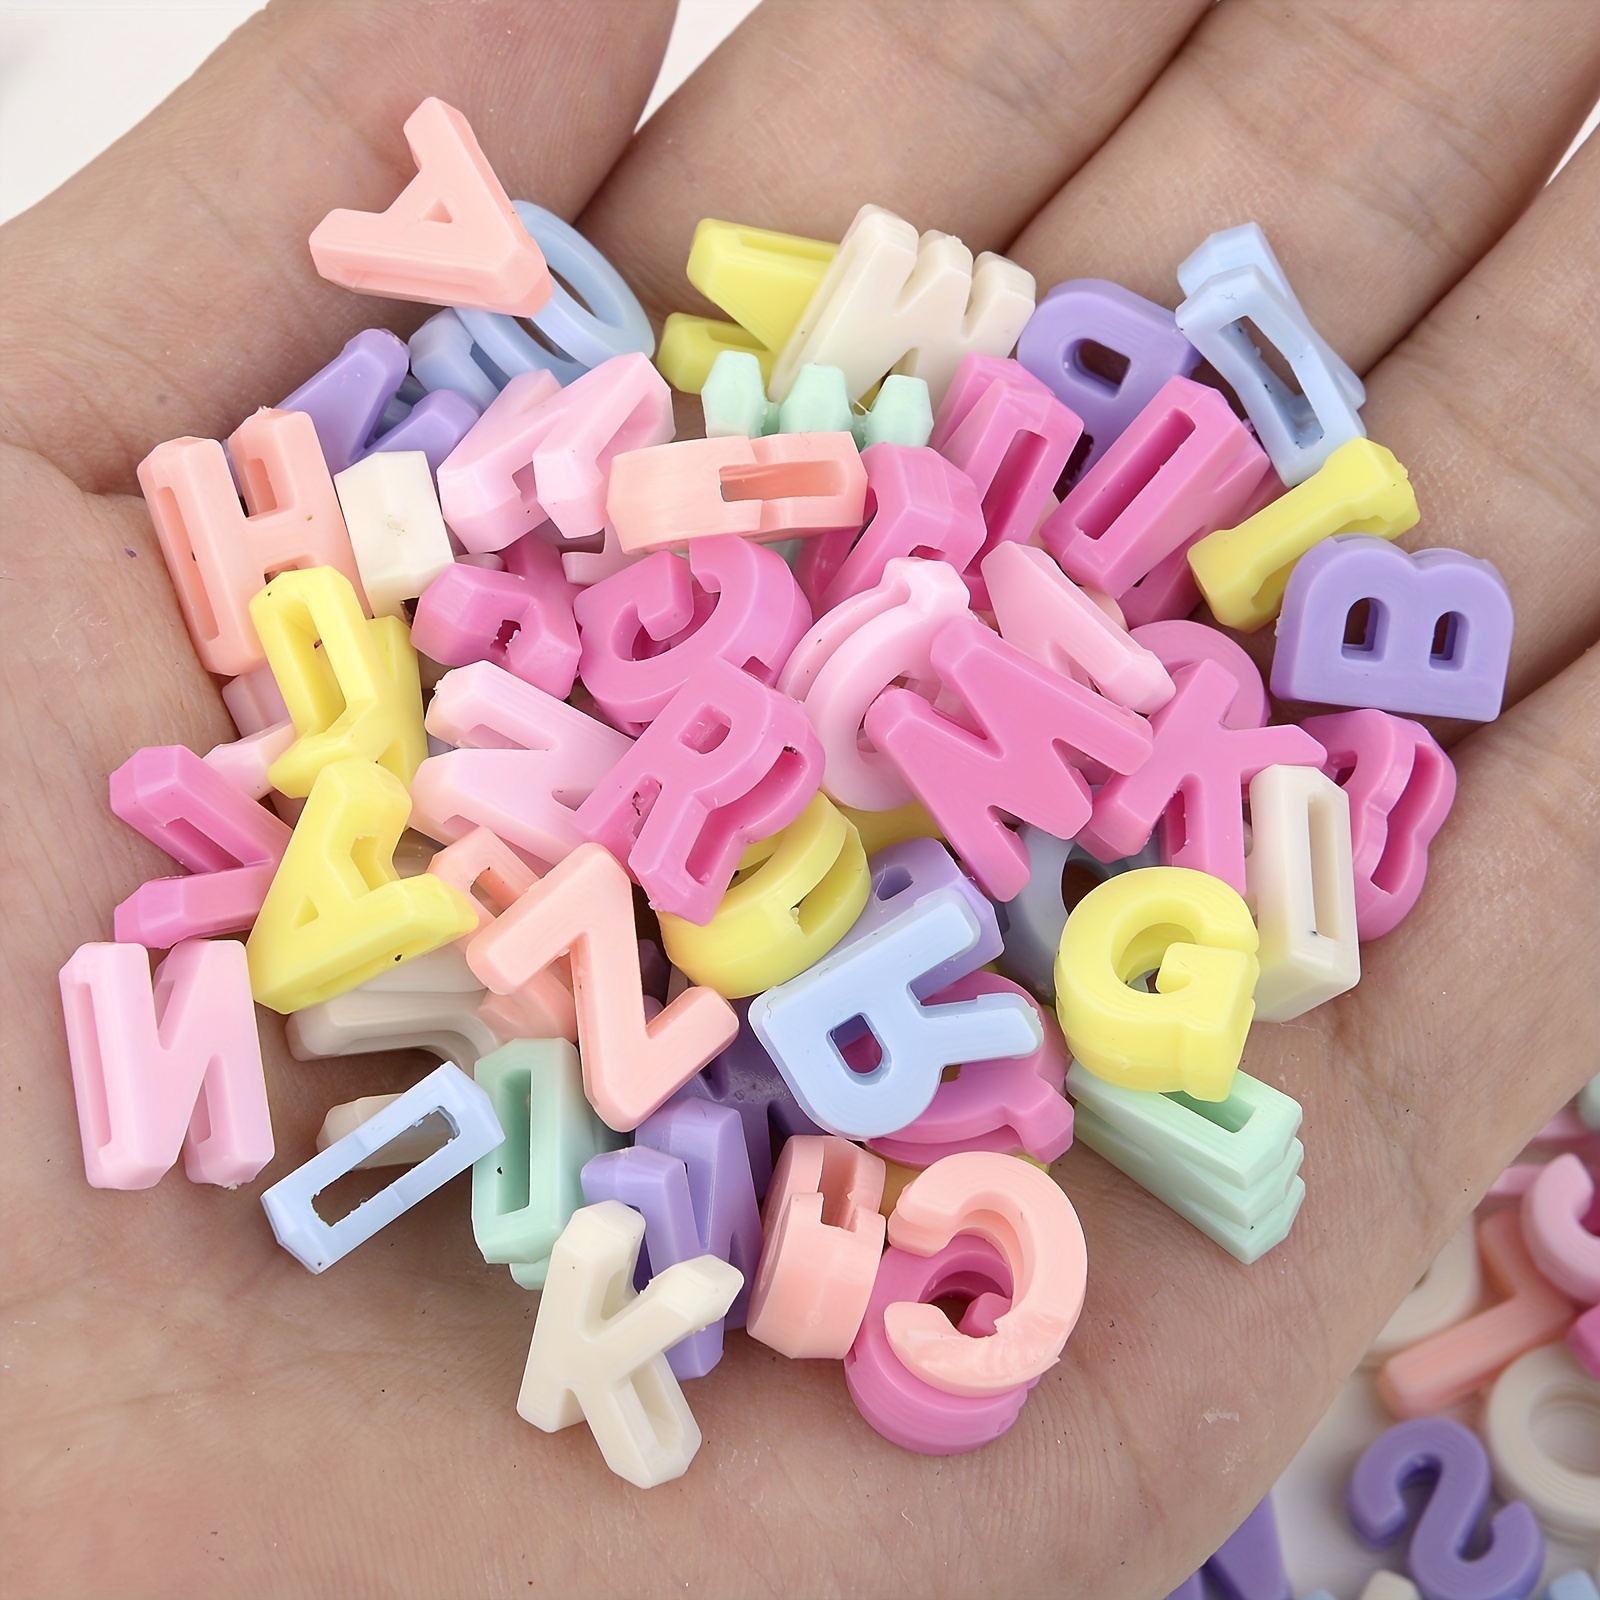 100pcs Acrylic Letter Beads Alphabet Beads Letters Beads for Bracelet and  Jewelry Making